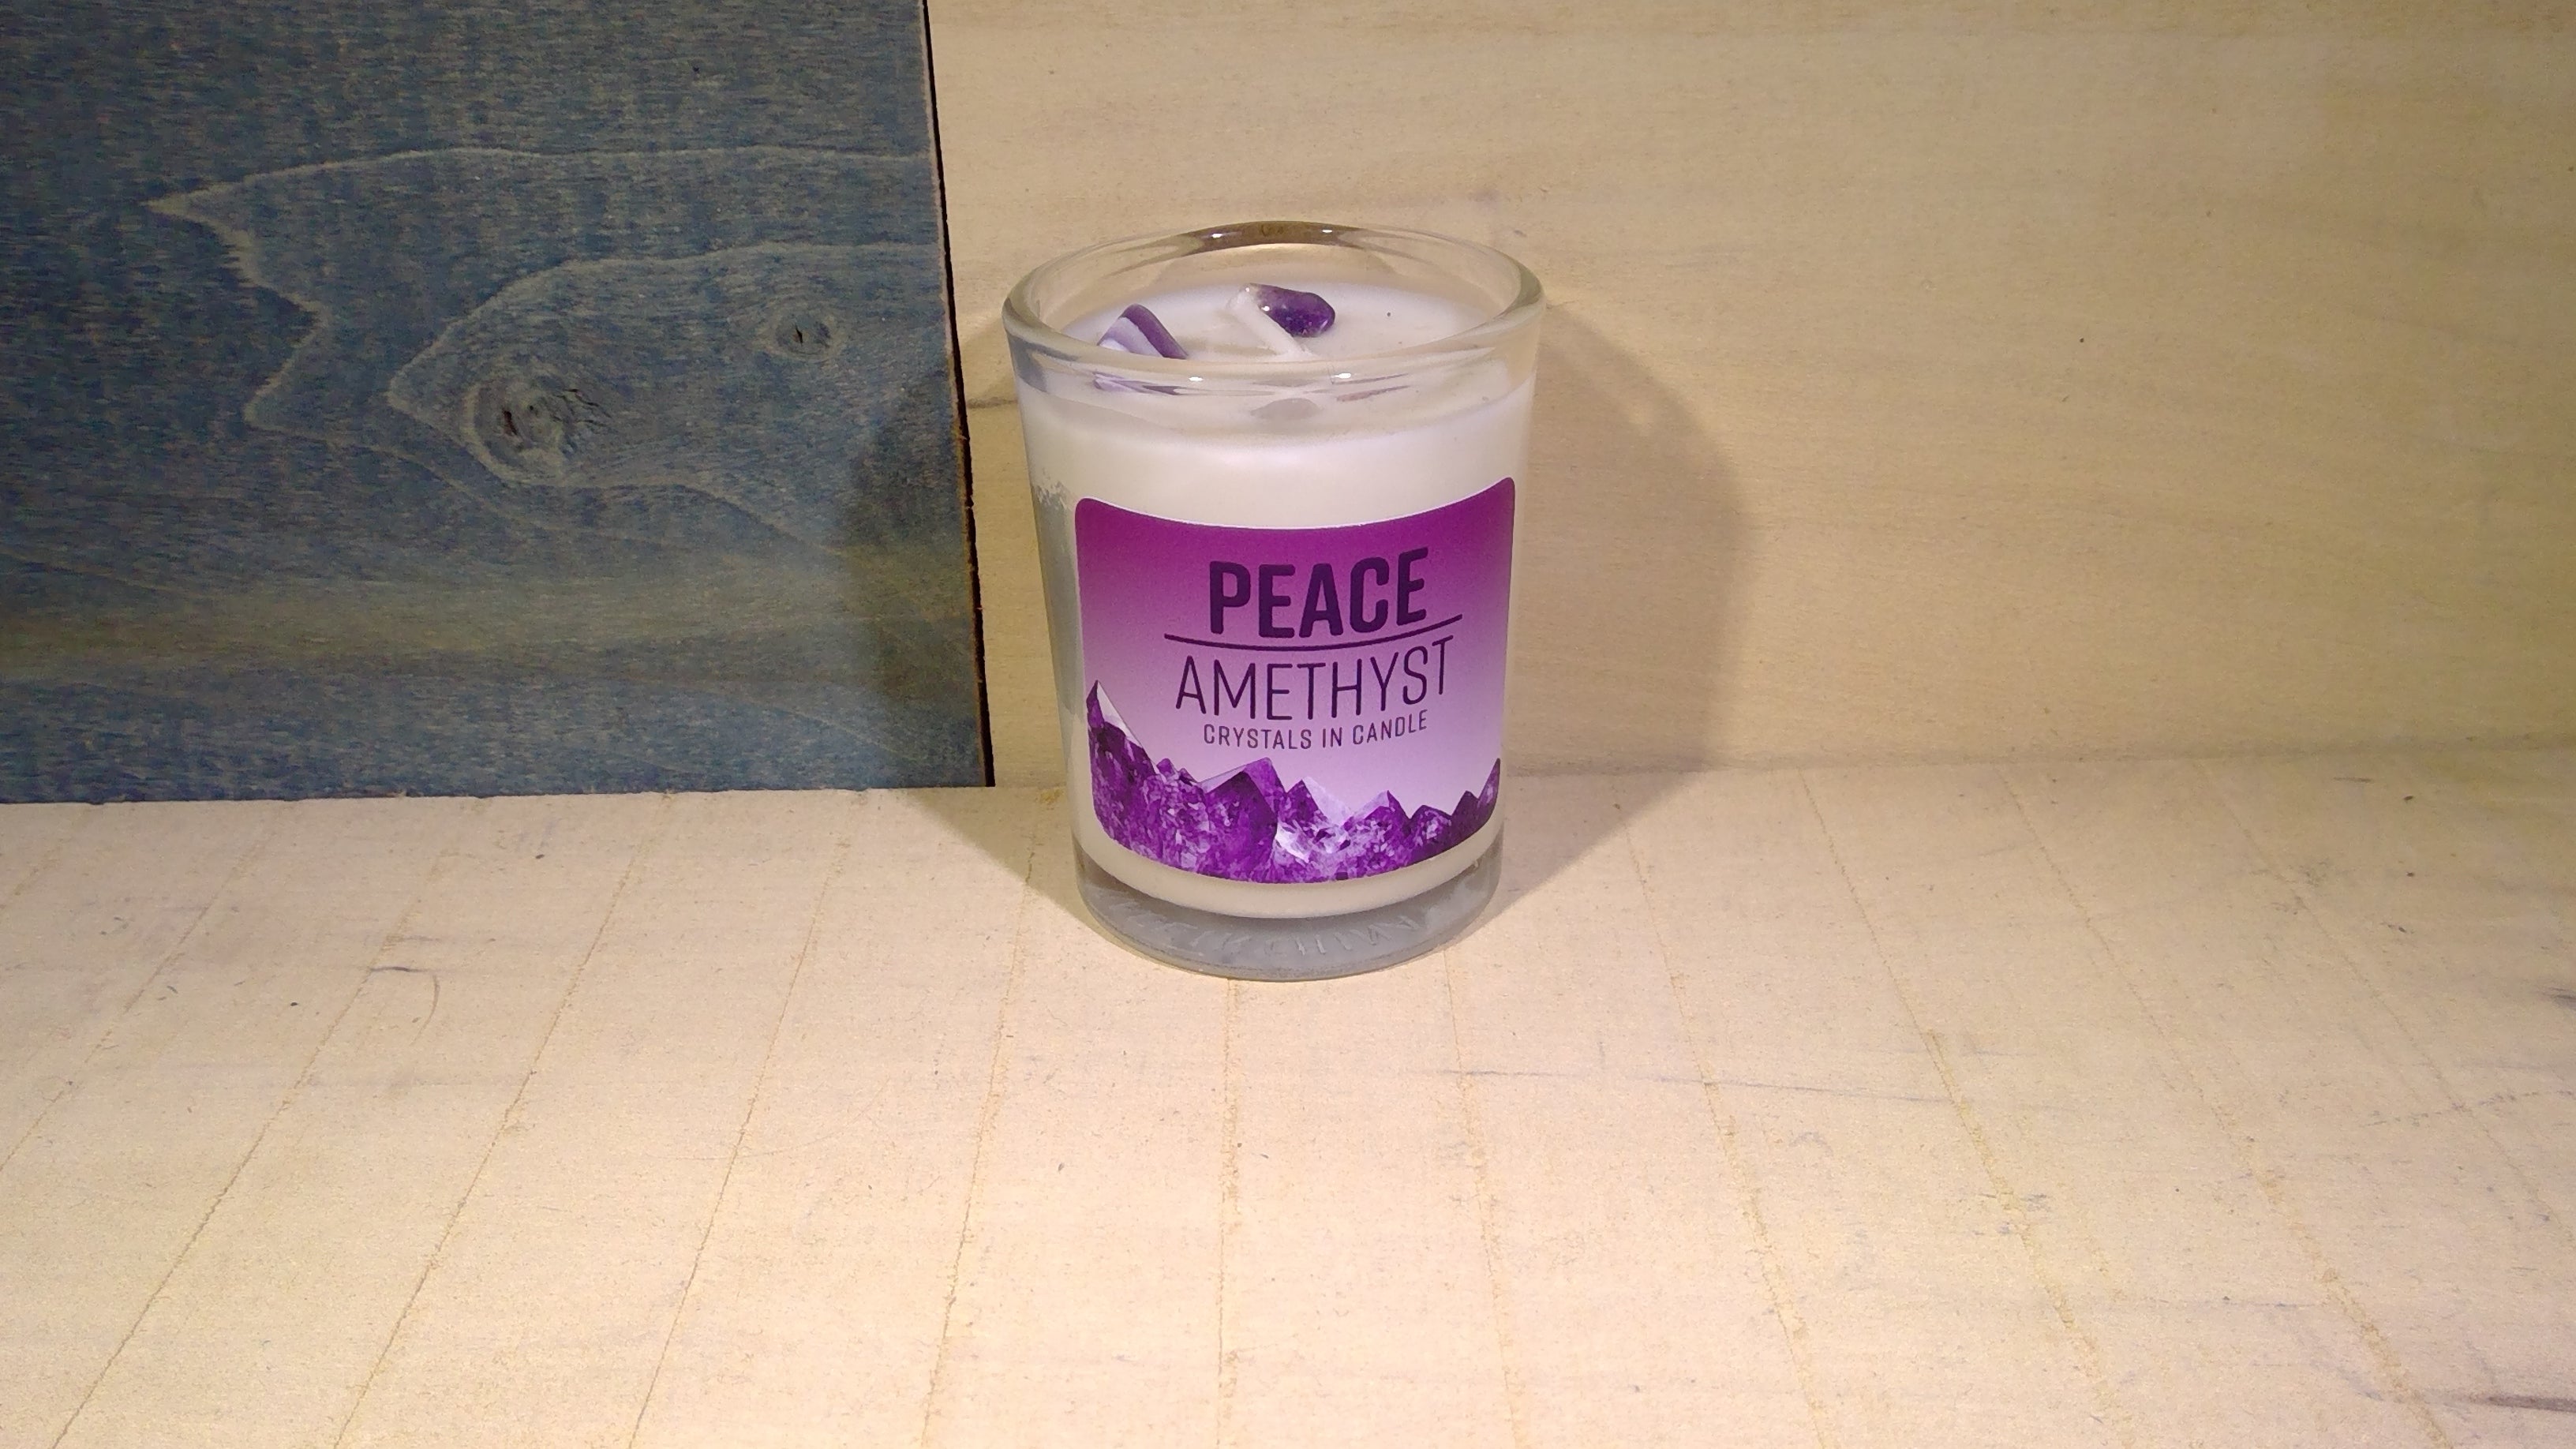 Candle Peace Energy Stone Amethyst-hotRAGS.com